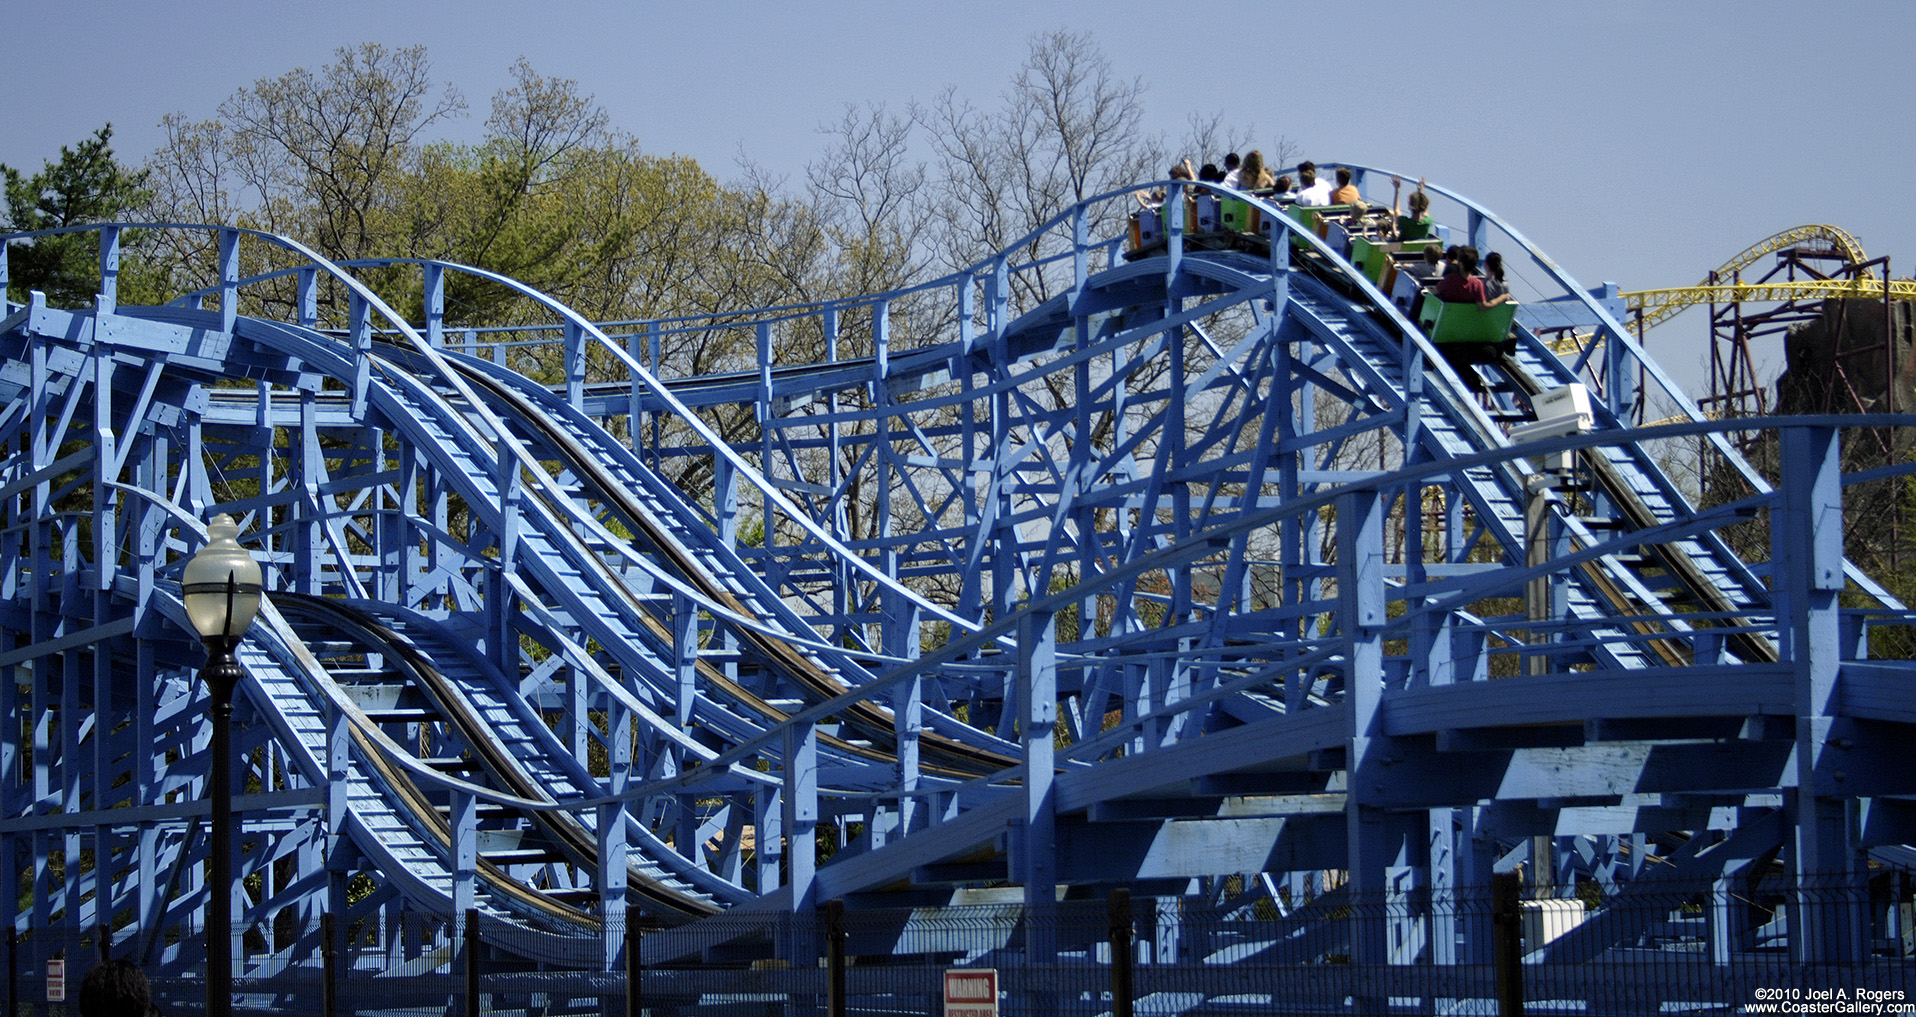 Ghoster Coaster (formerly the Scooby Doo)